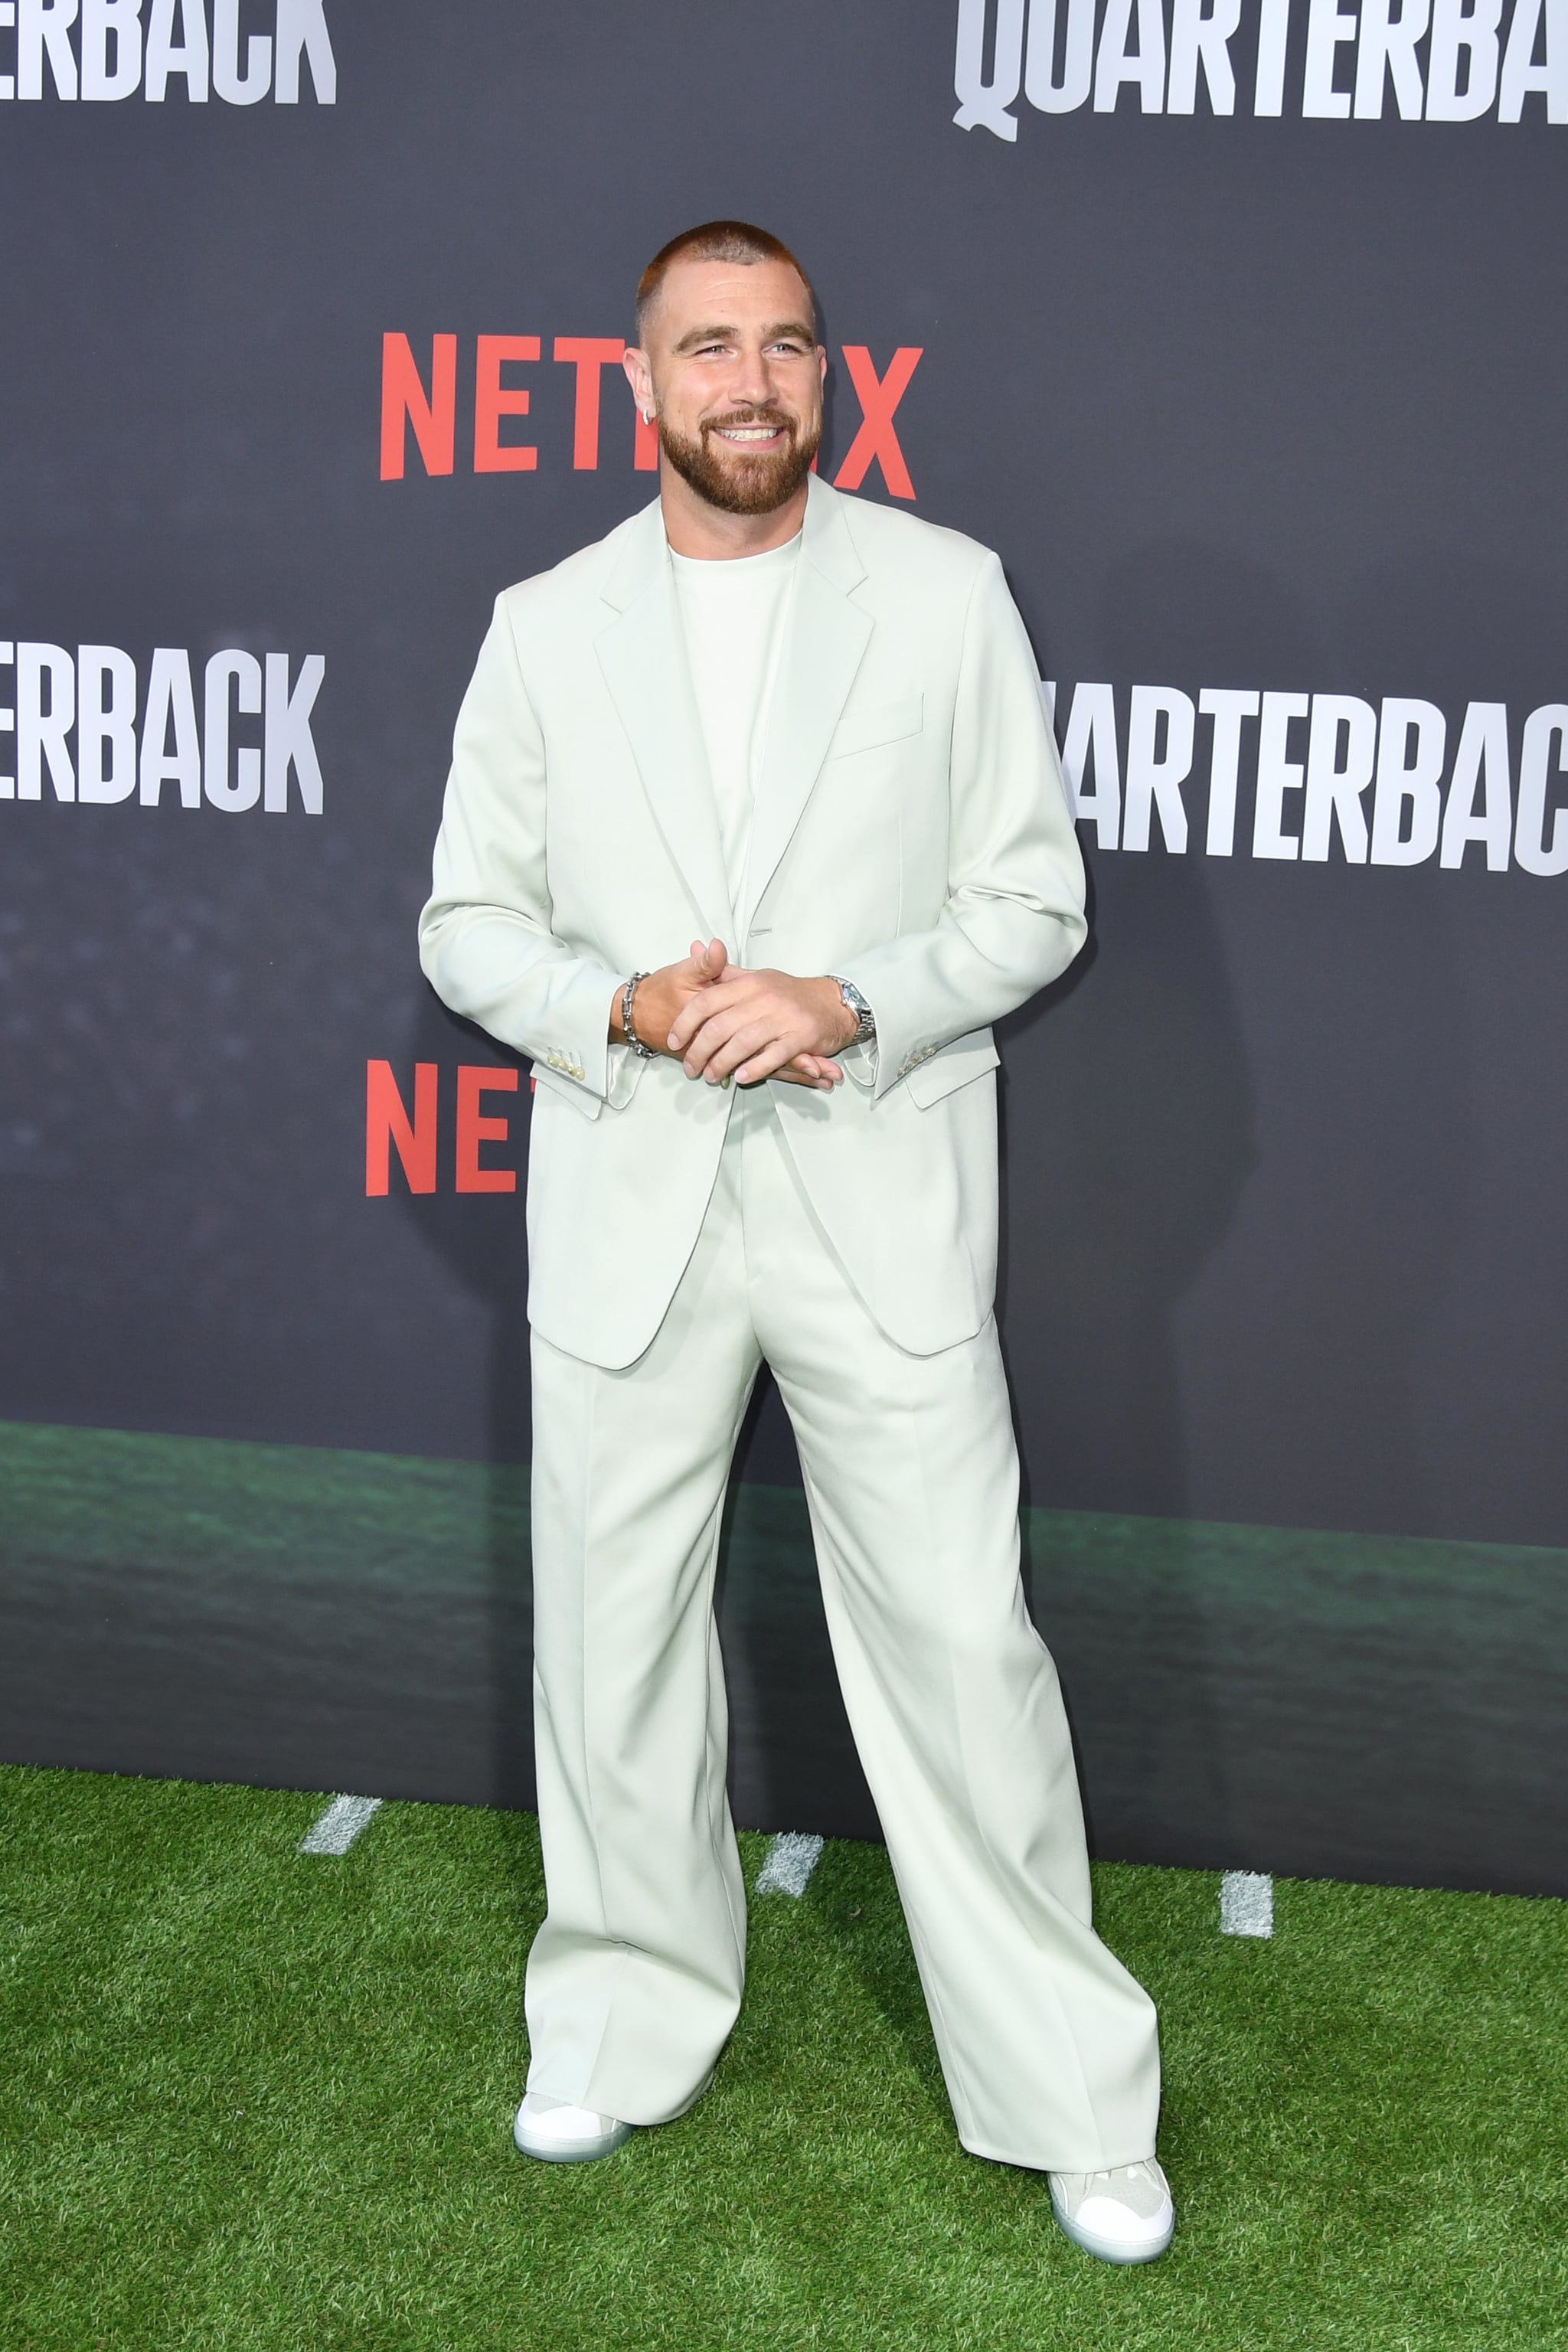 DO YOU SEE THIS COAT? #NFL #NFLUK #Chiefs @chiefs #Kelce #Fit